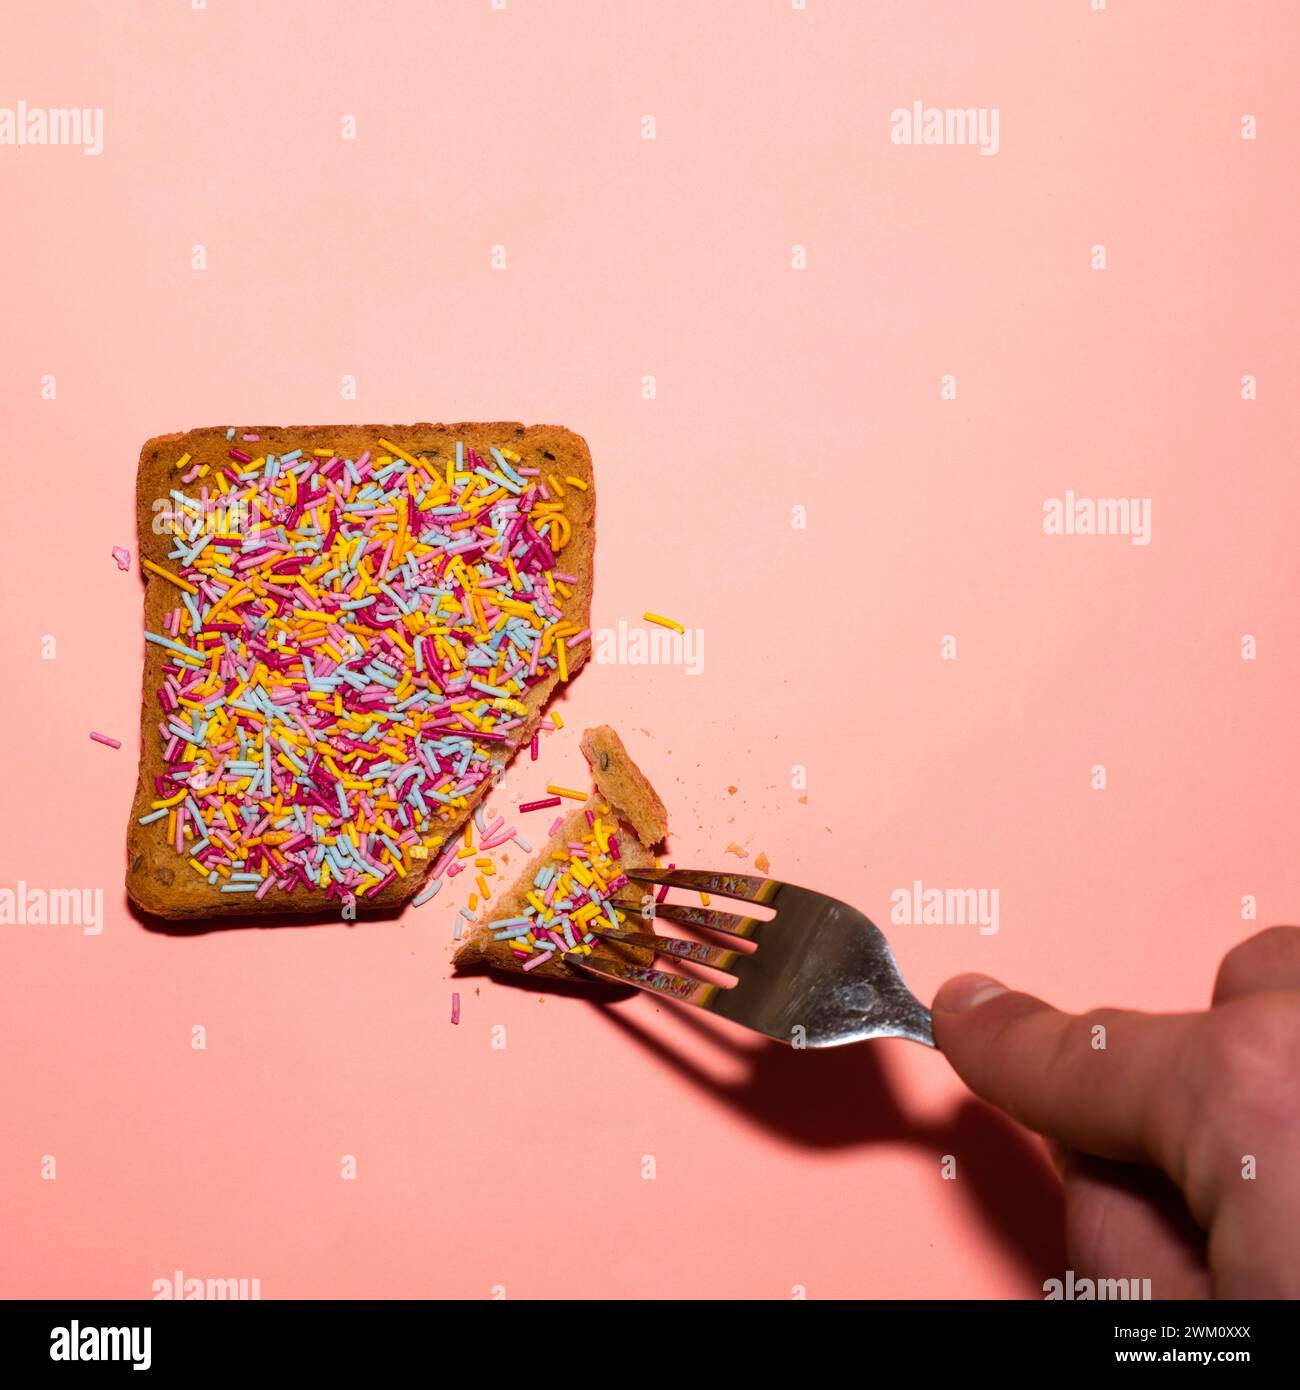 Toast with colorful sprinkles and fork on pink background. Creative food concept. Stock Photo